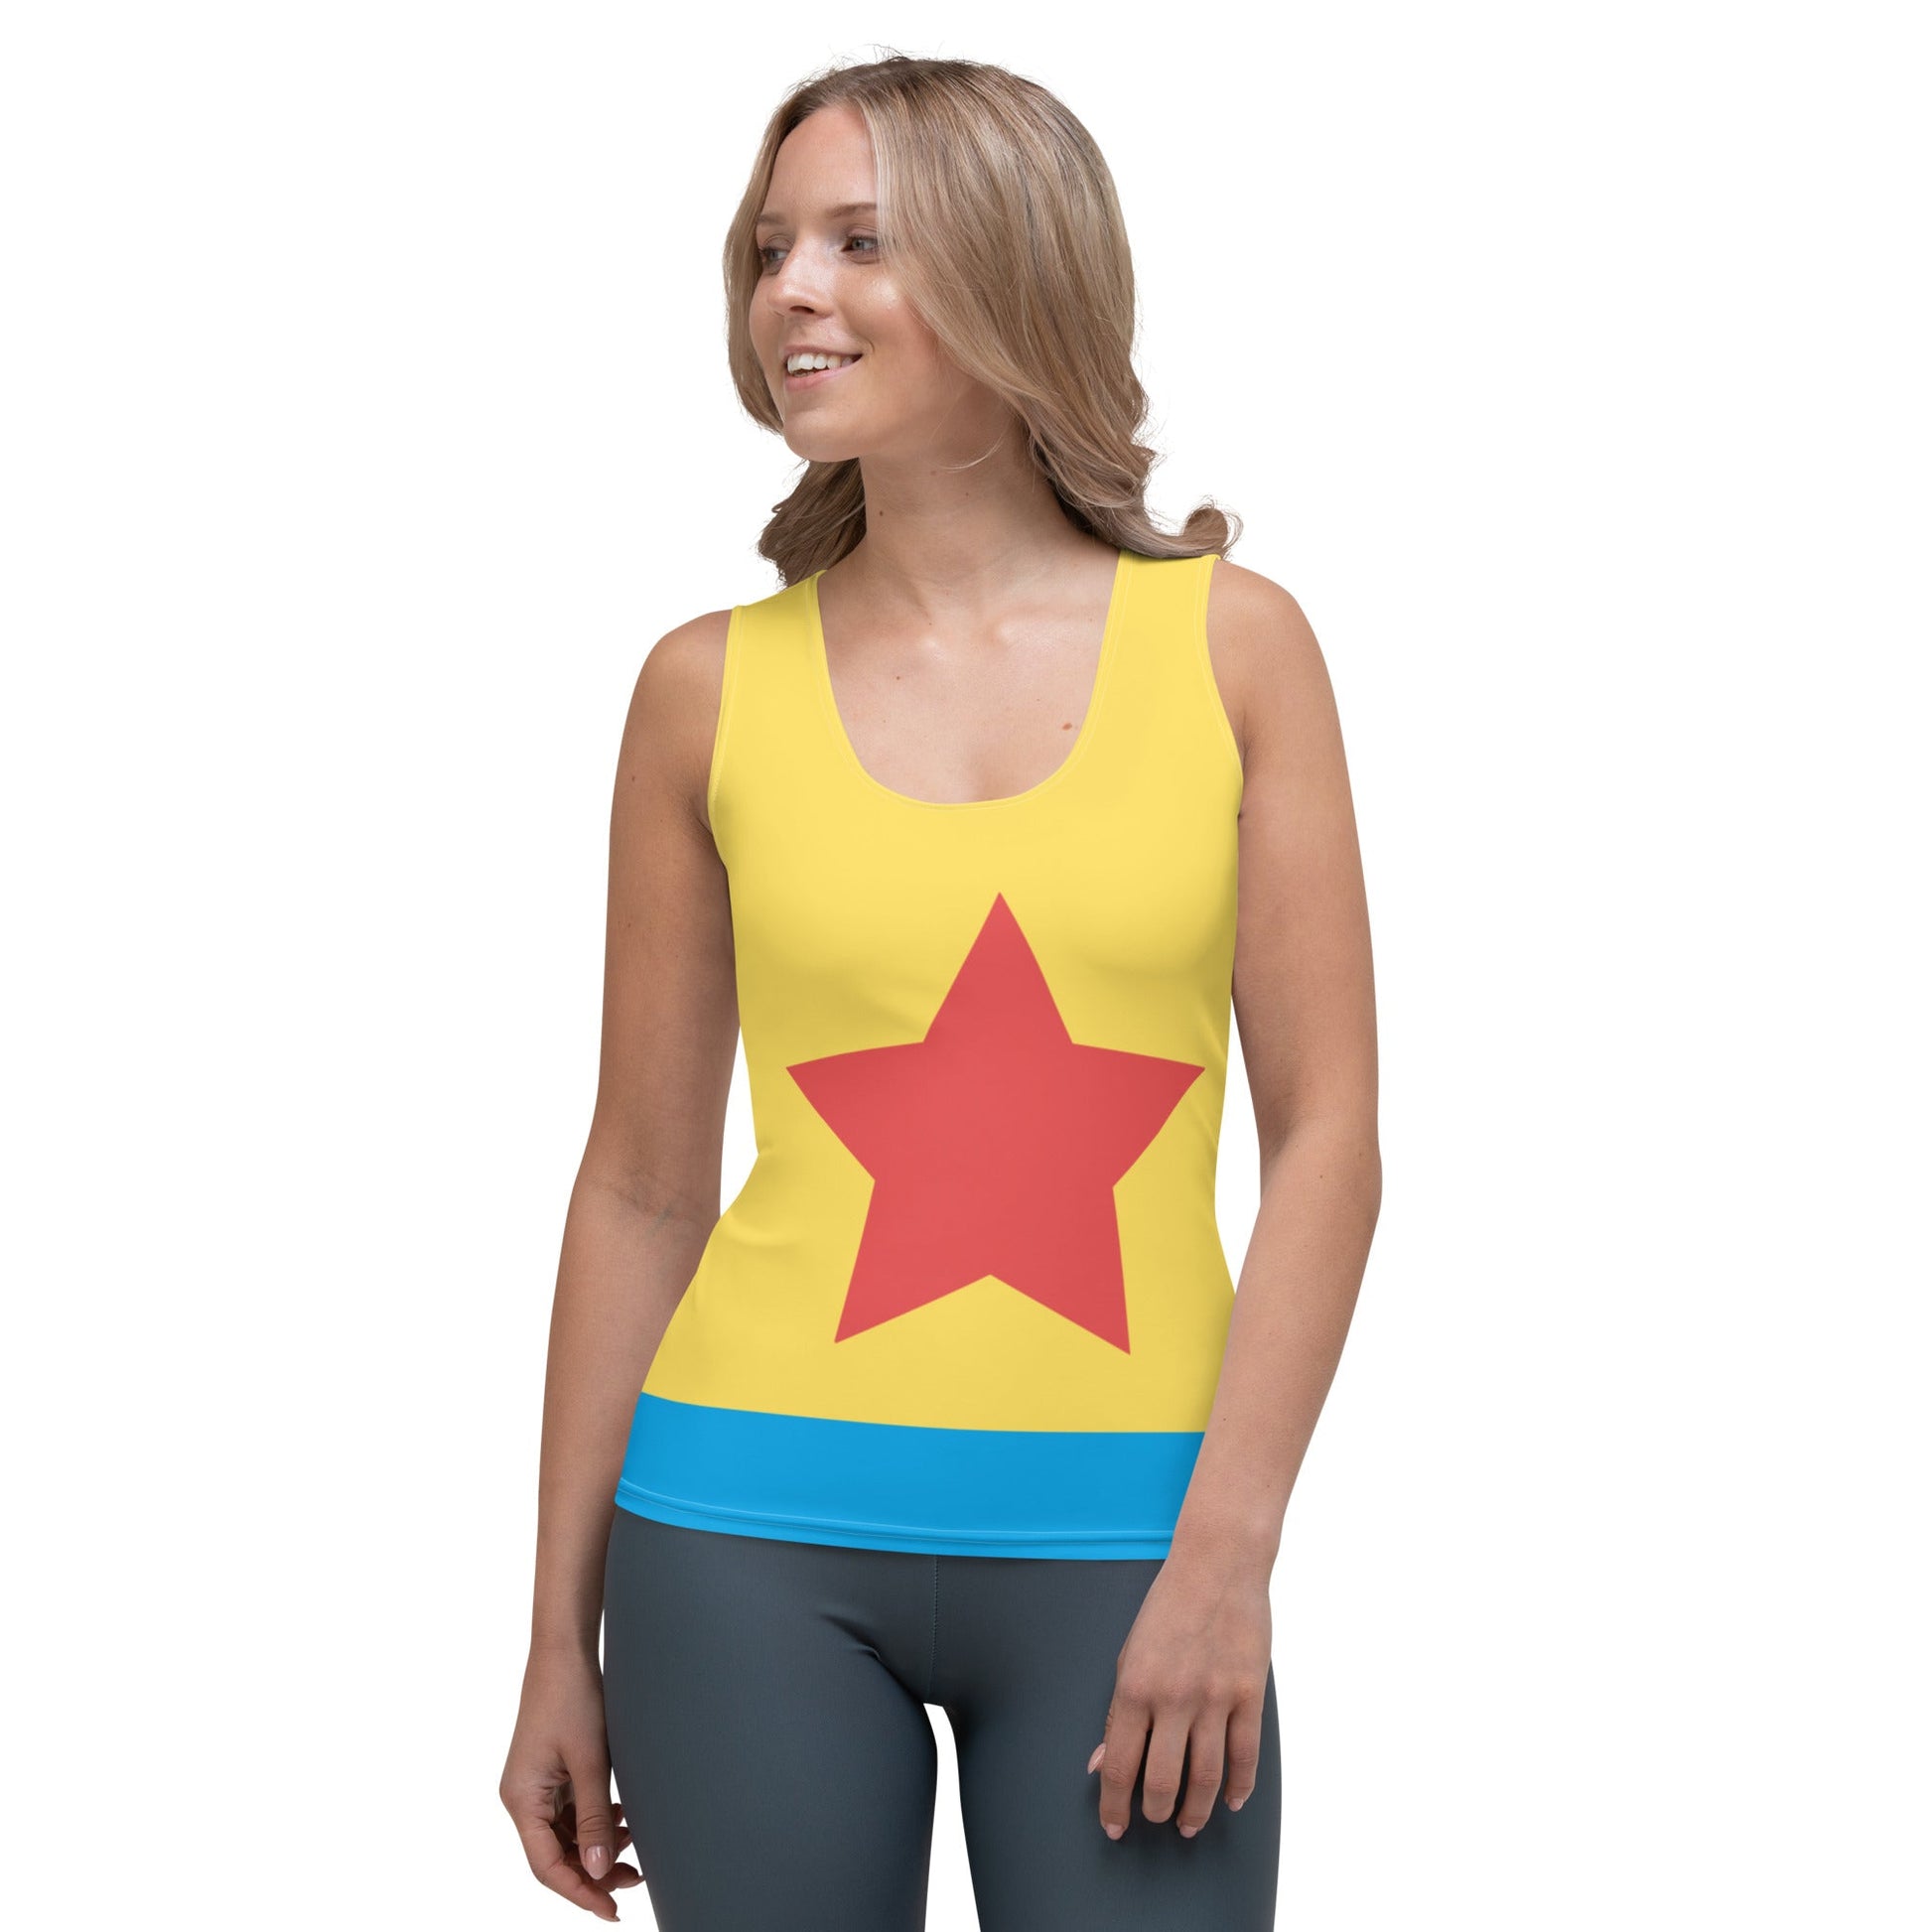 Cartoon Ball Tank Top active wearboo to youcartoon style#tag4##tag5##tag6#